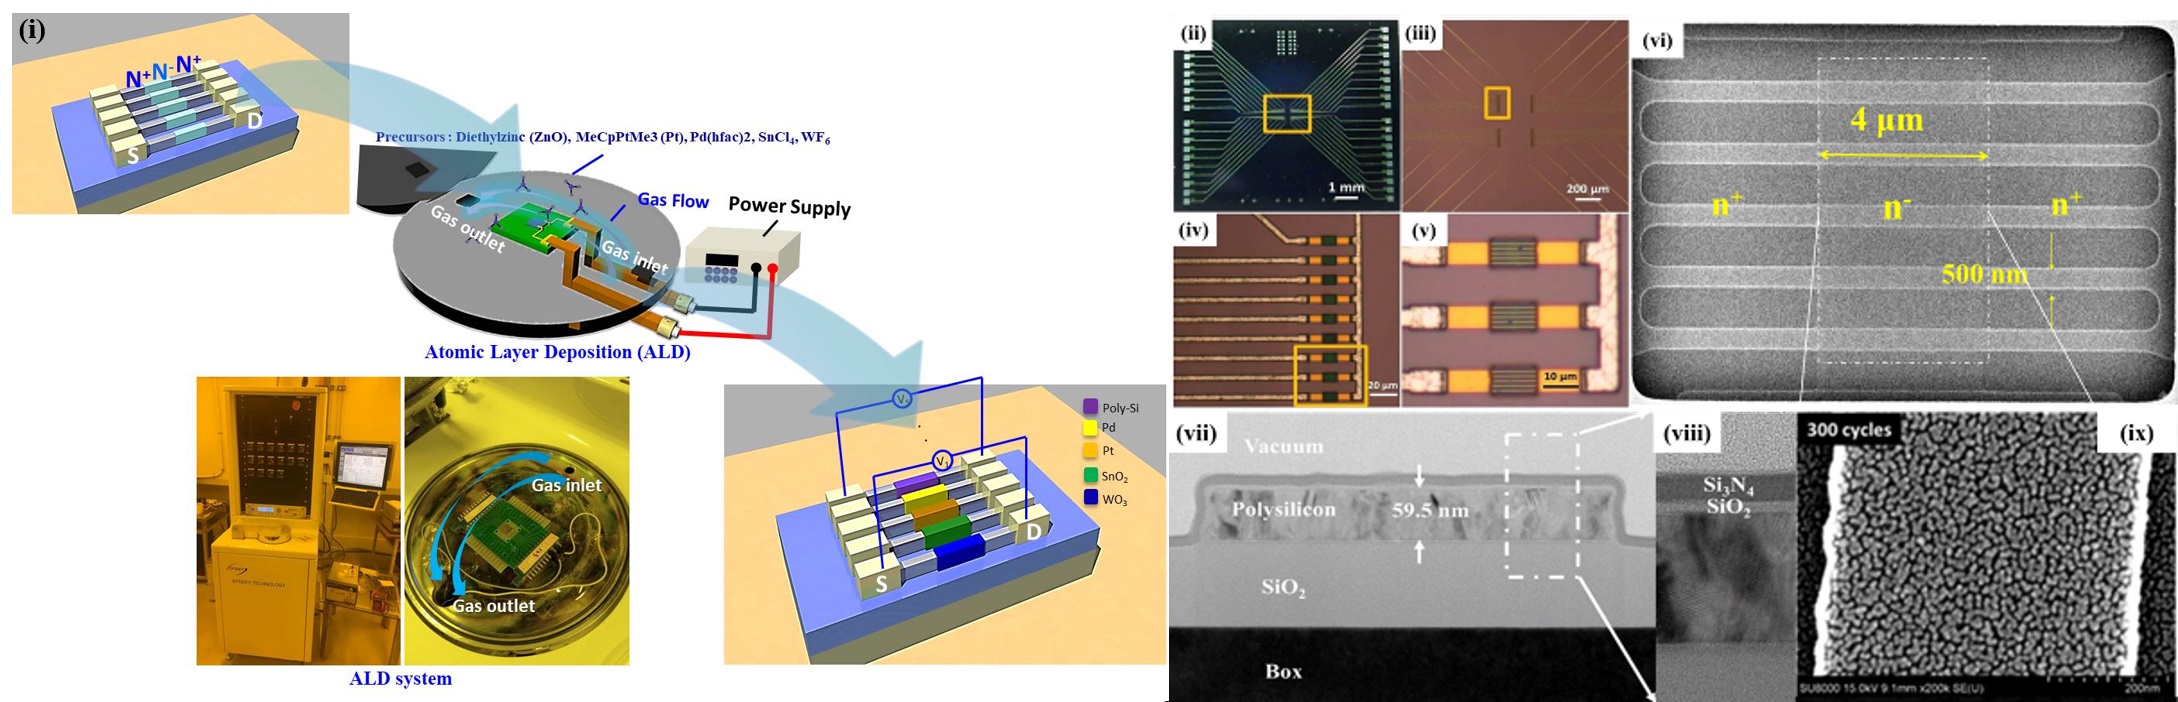 Intelligent E-nose with Joule Self-heating Nanodevice Array